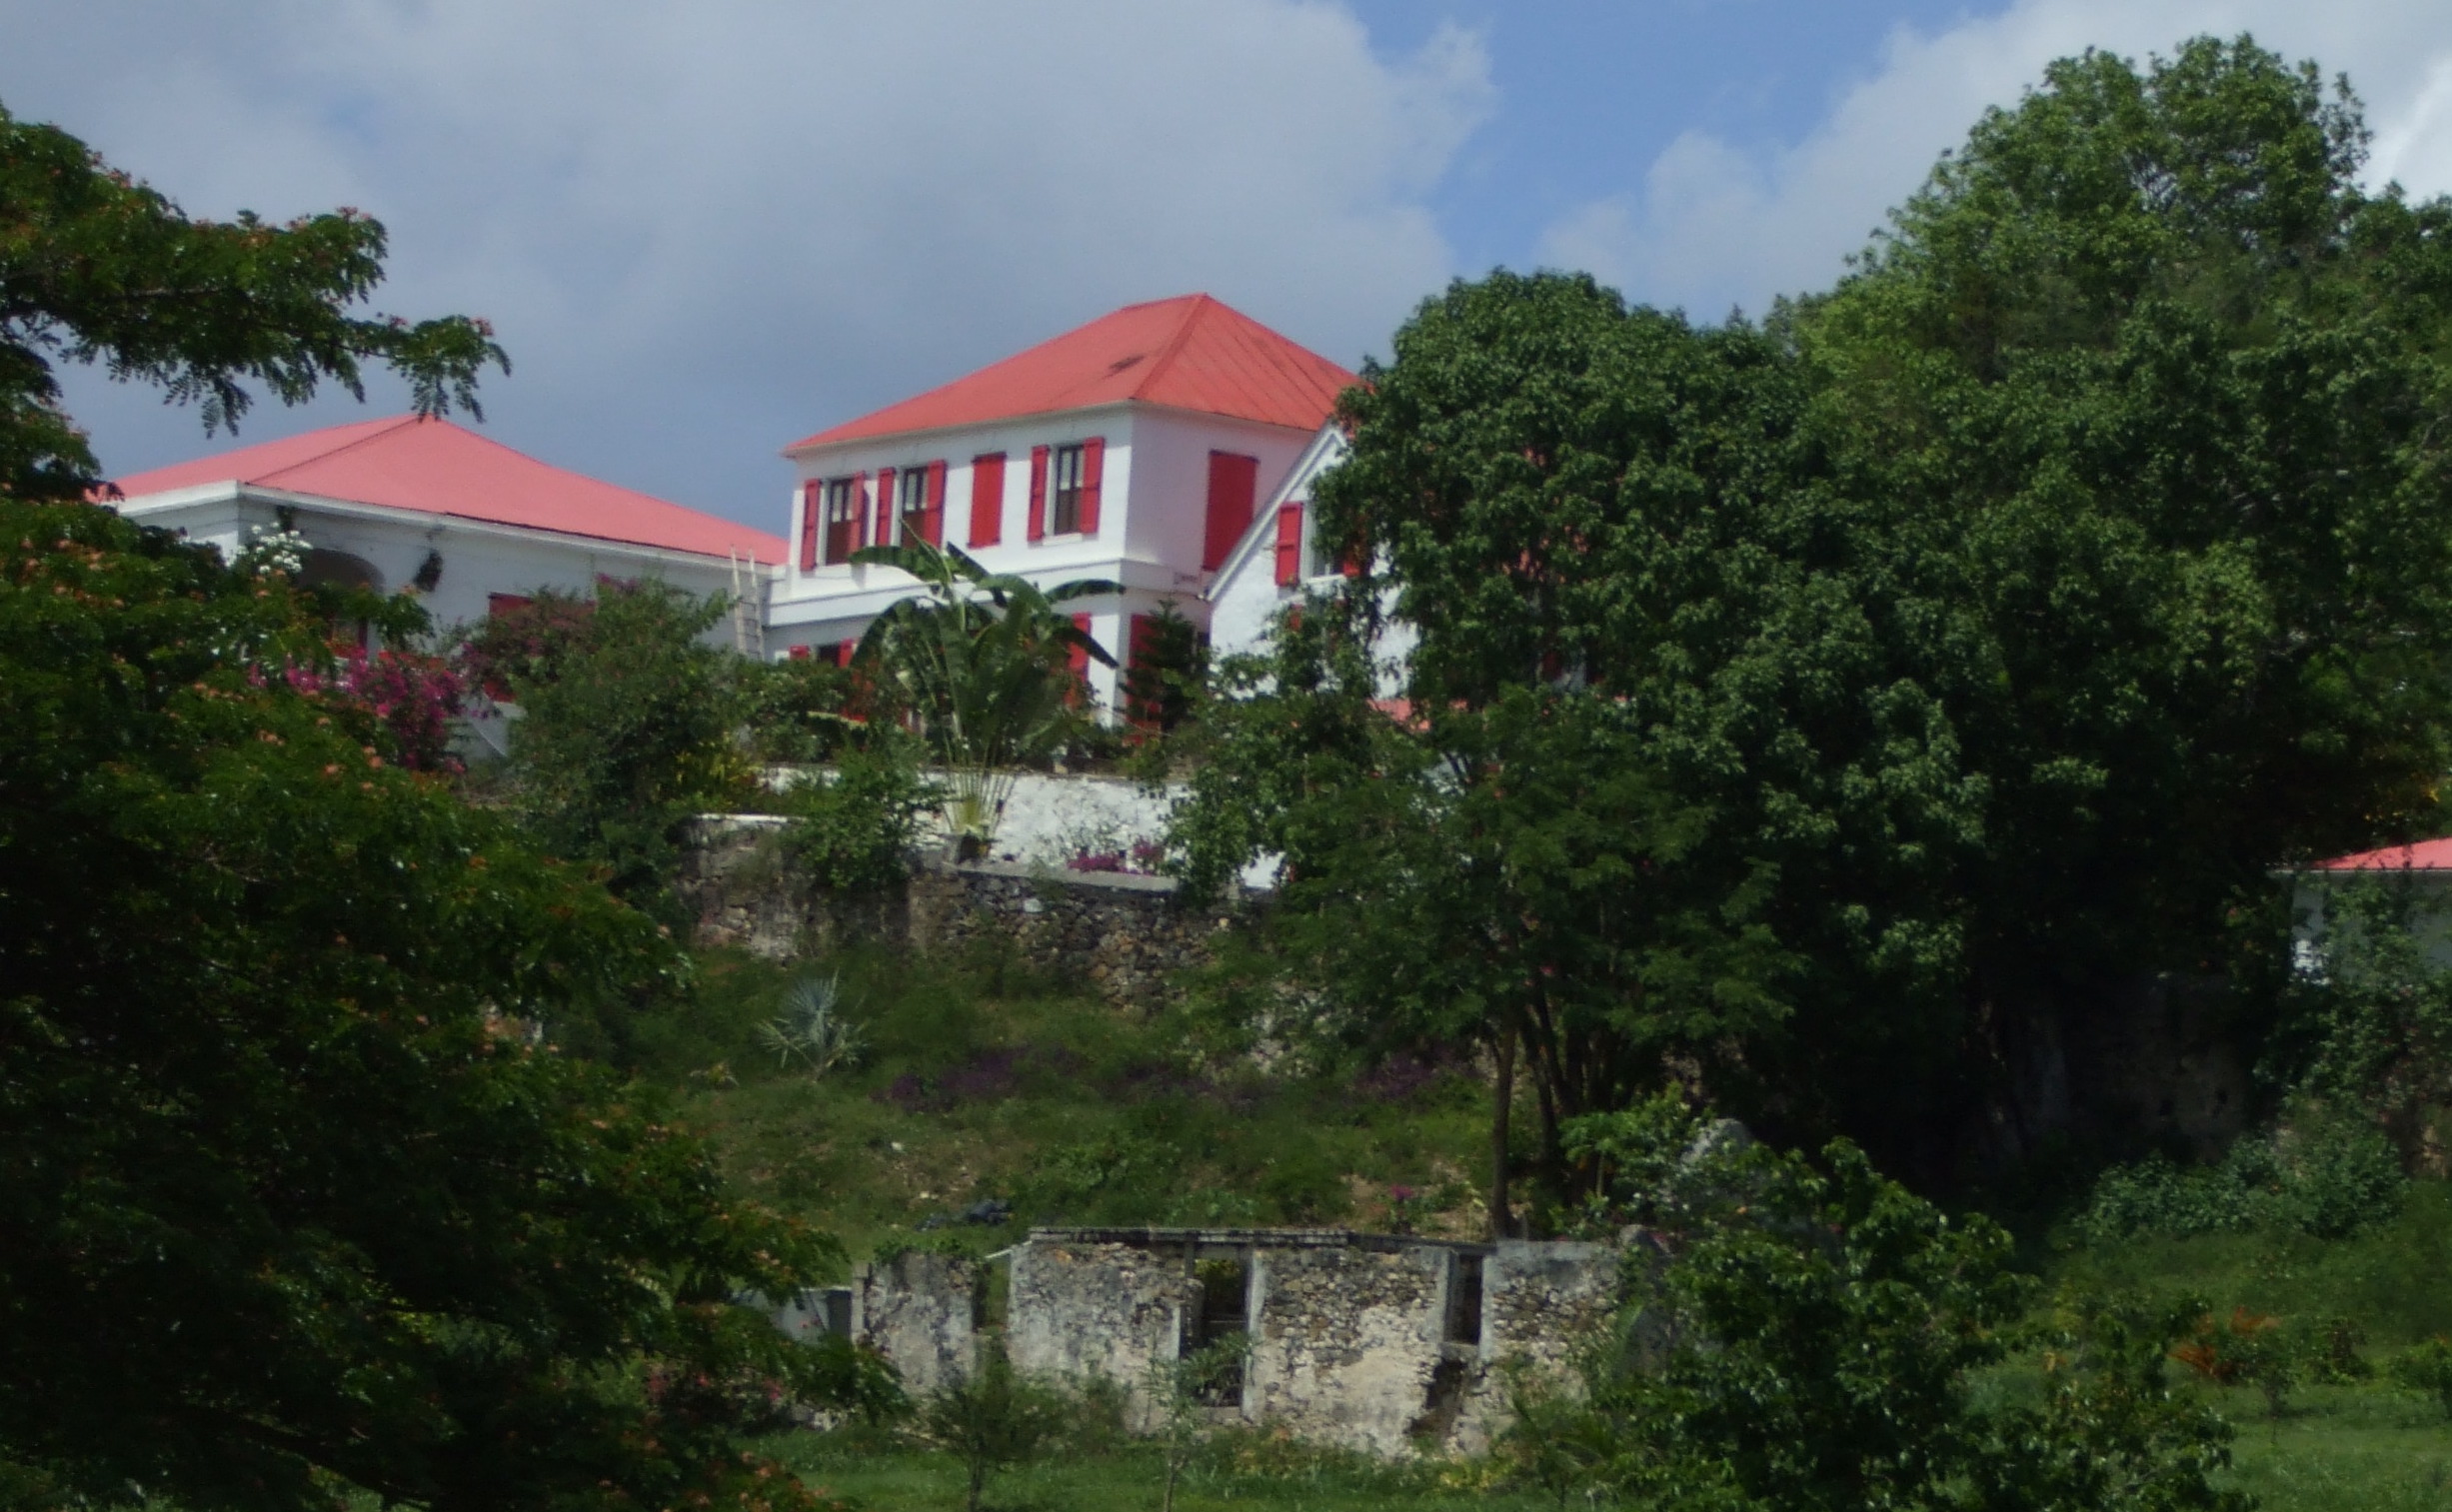 An Estate Butler Bay 18th century great house, located in the Northside Quarter A on St. Croix. (Photo by Olasee Davis)